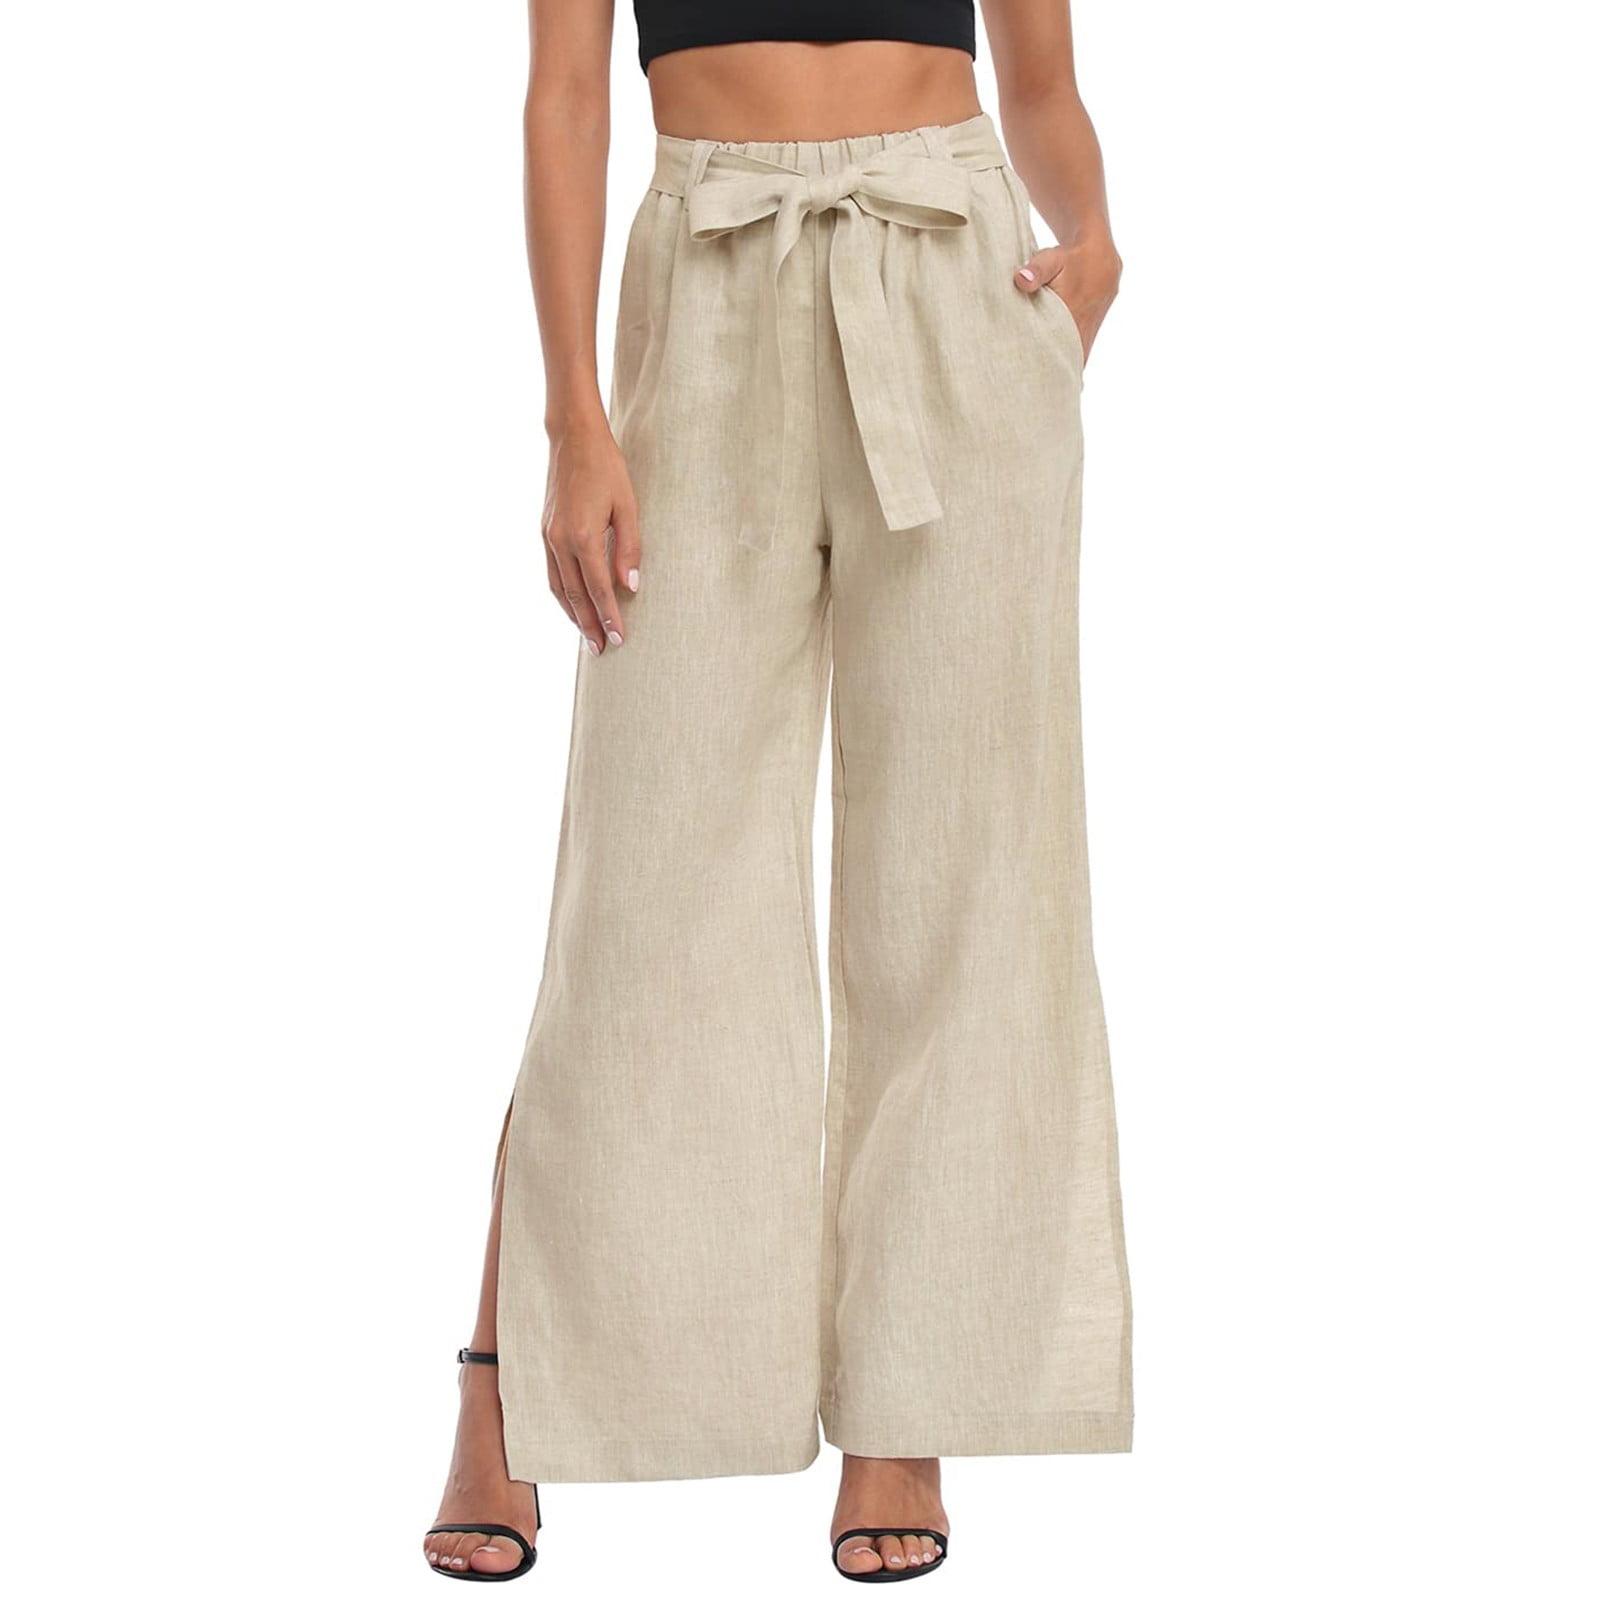 ZESICA Women's Summer Linen Wide Leg Flowy Palazzo Pants Casual High  Waisted Loose Trousers with Pockets,Almond,Small at  Women's Clothing  store